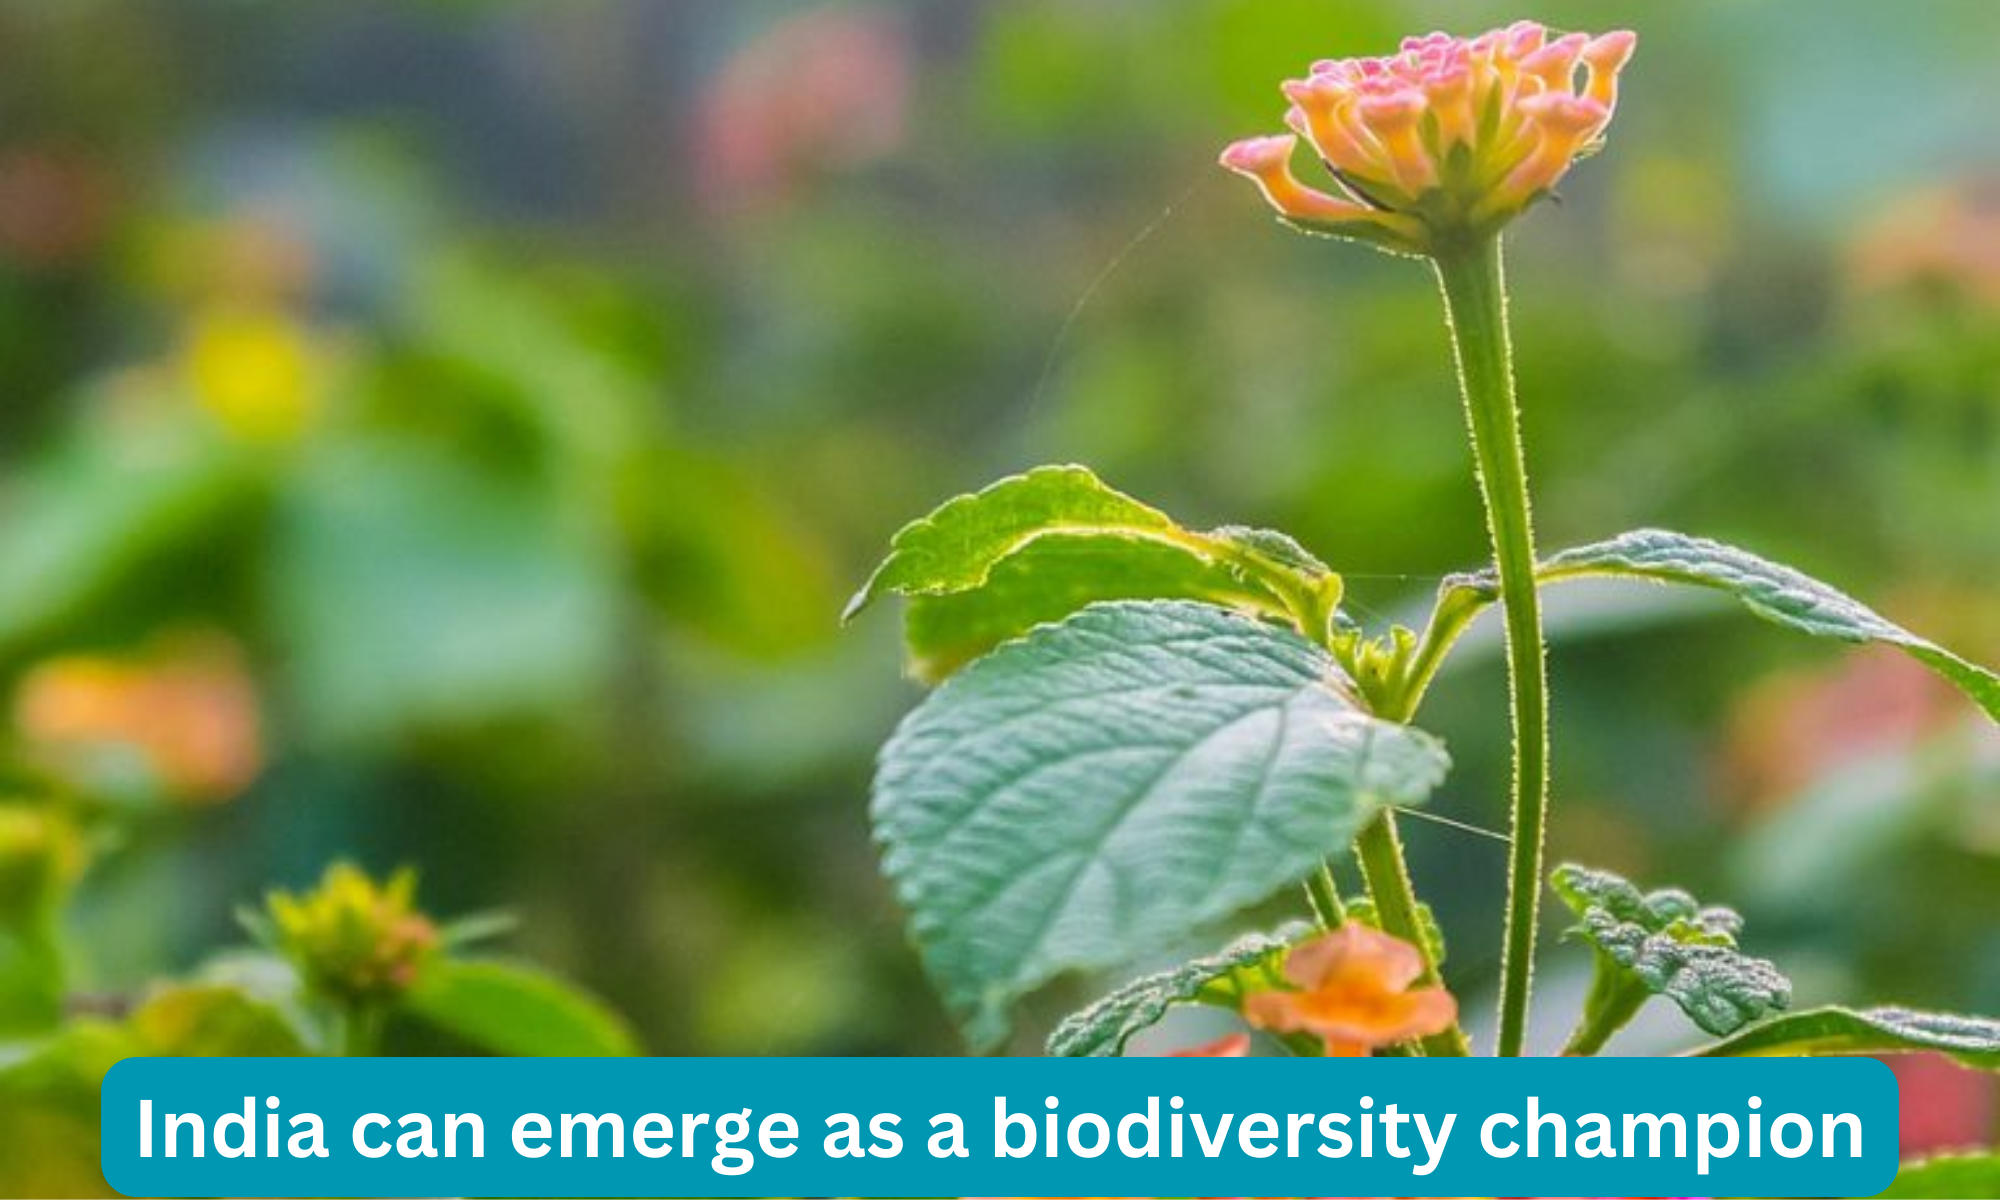 India can emerge as a biodiversity champion